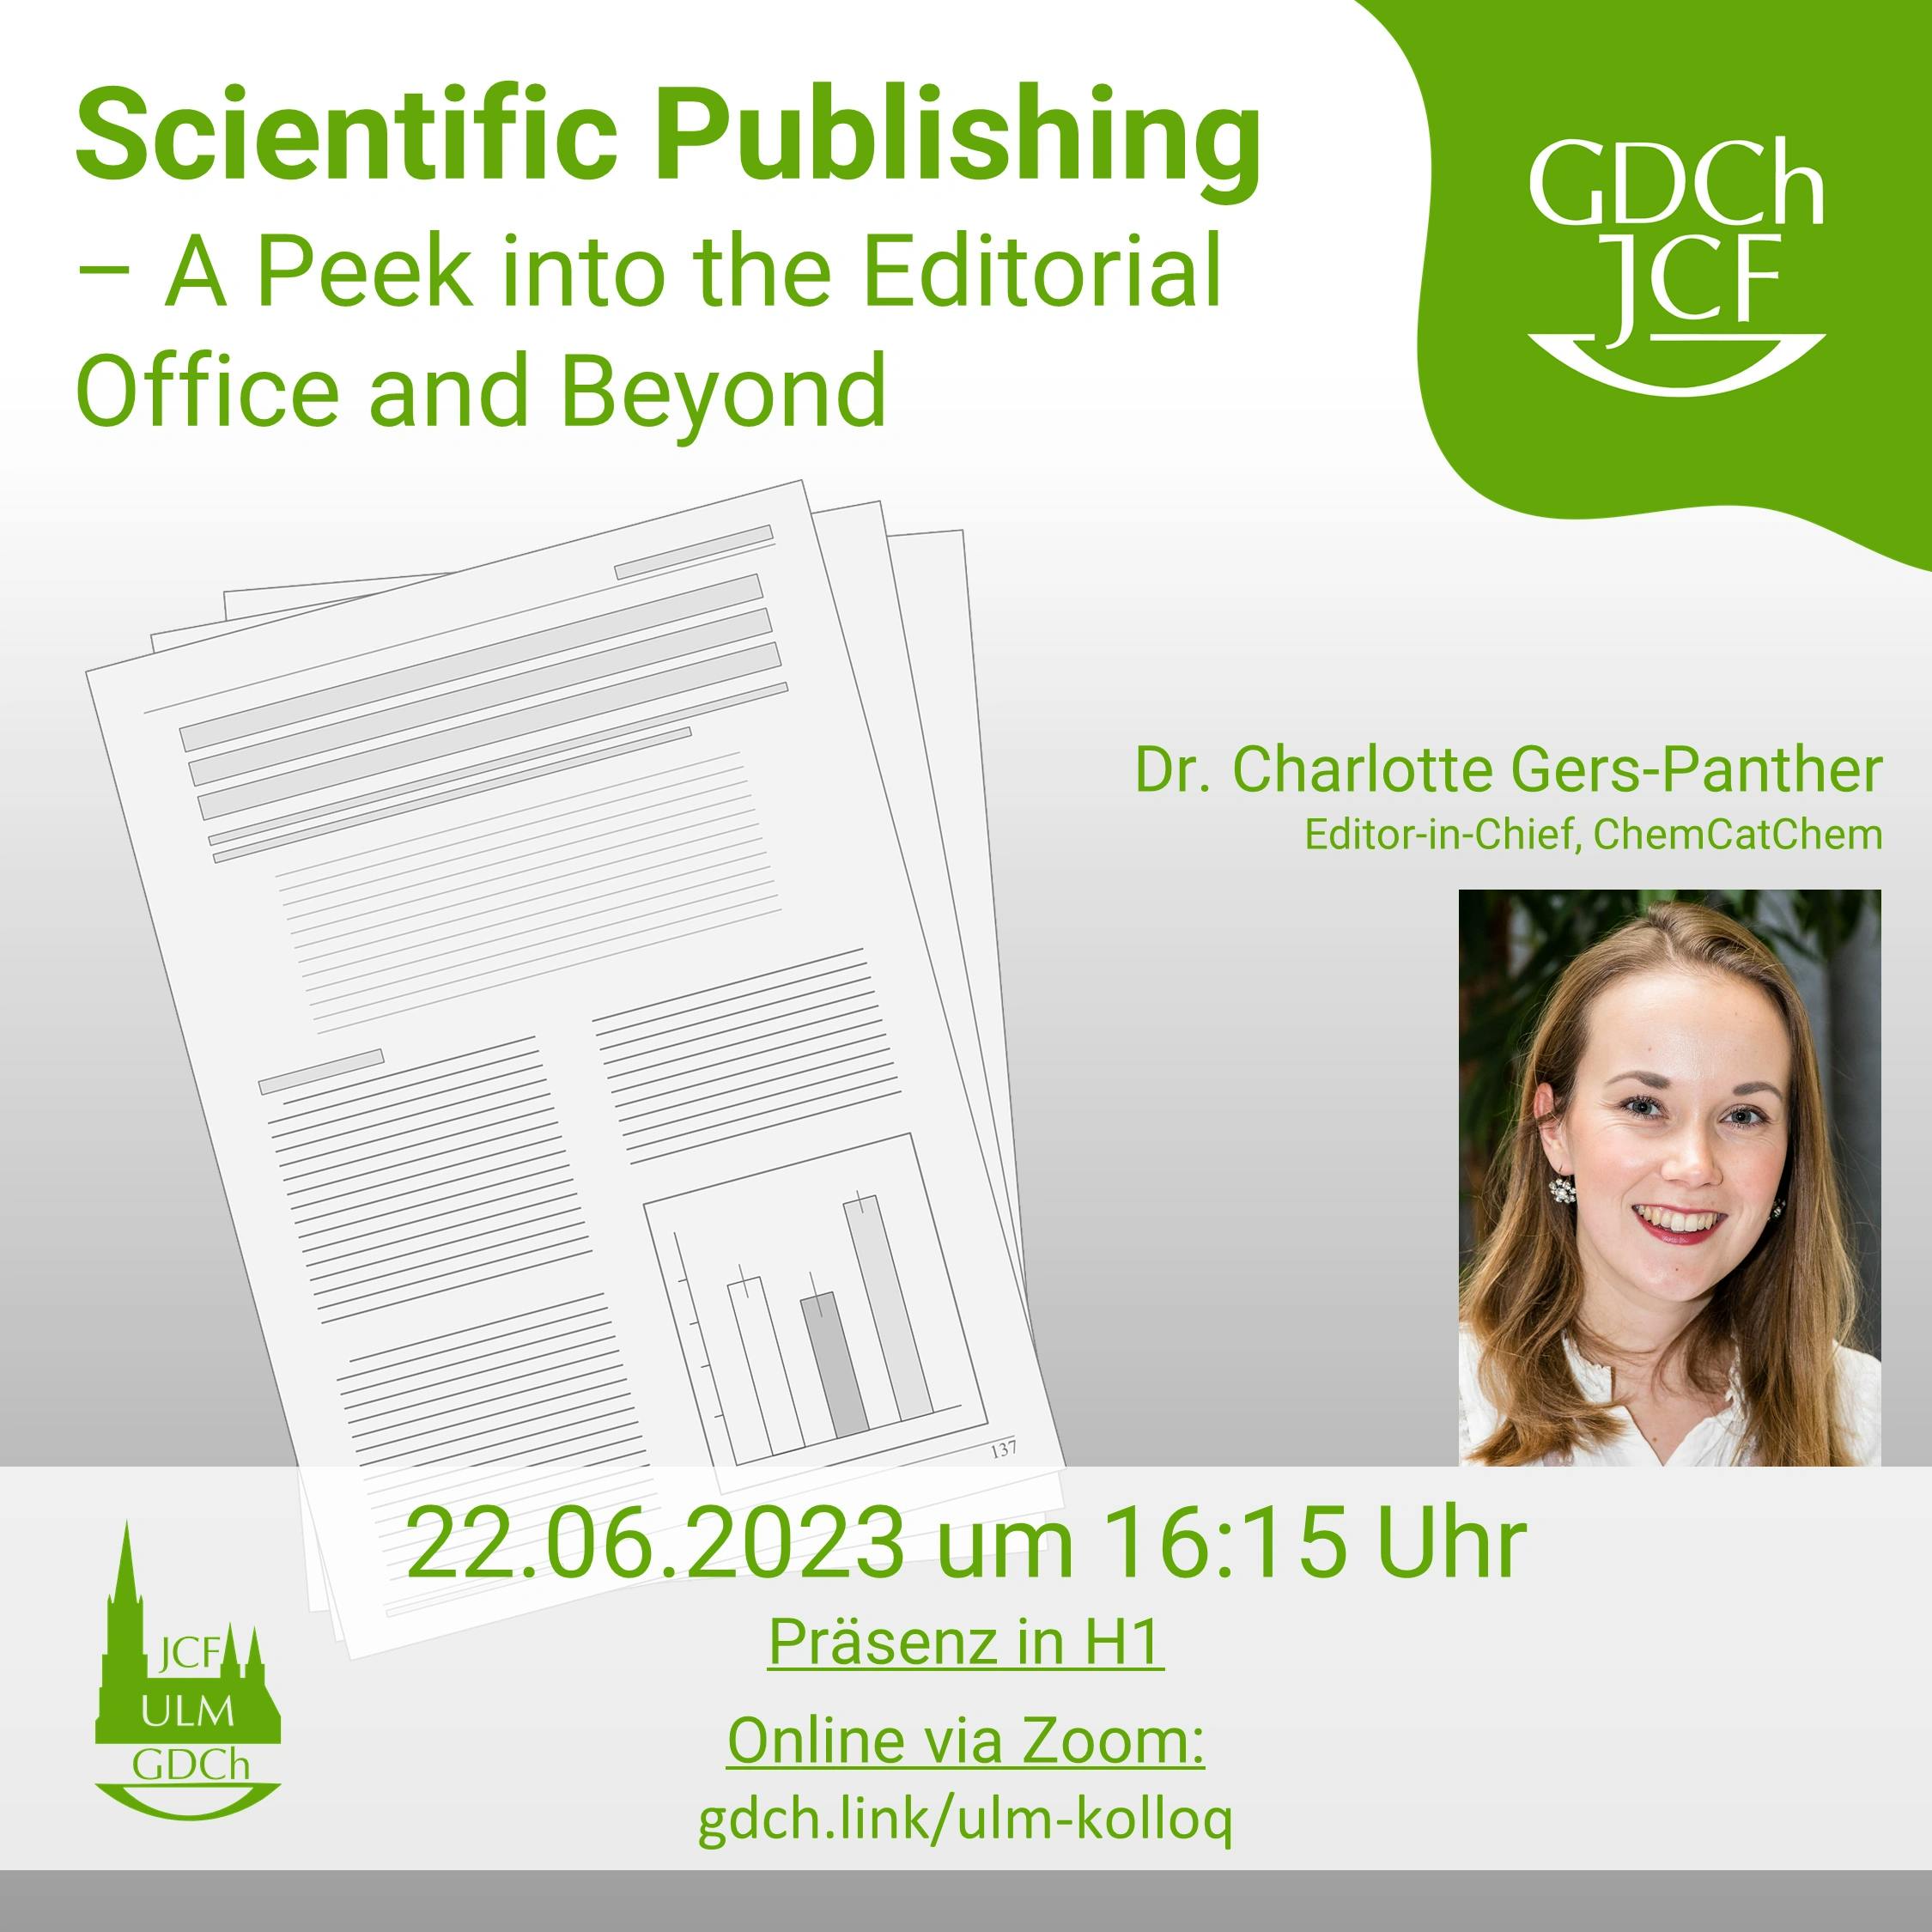 Scientific Publishing- A Peek into the Editorial Office and Beyond